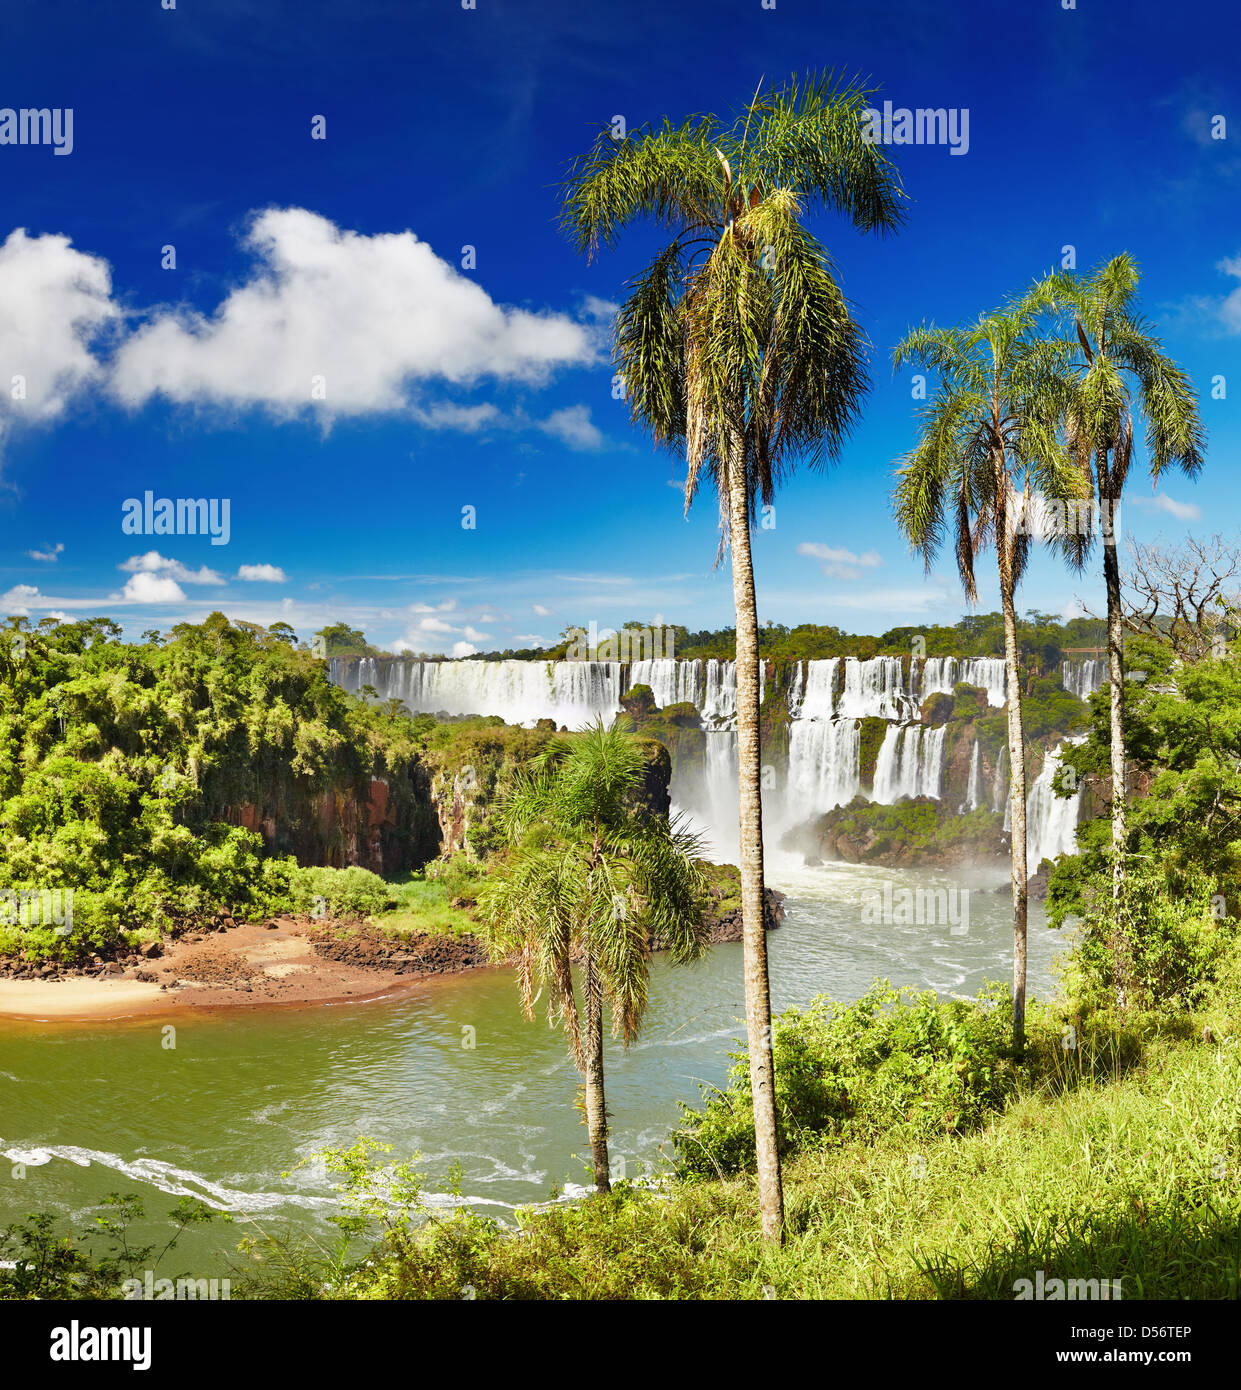 Iguassu Falls, the largest series of waterfalls of the world, located at the Brazilian and Argentinian border Stock Photo